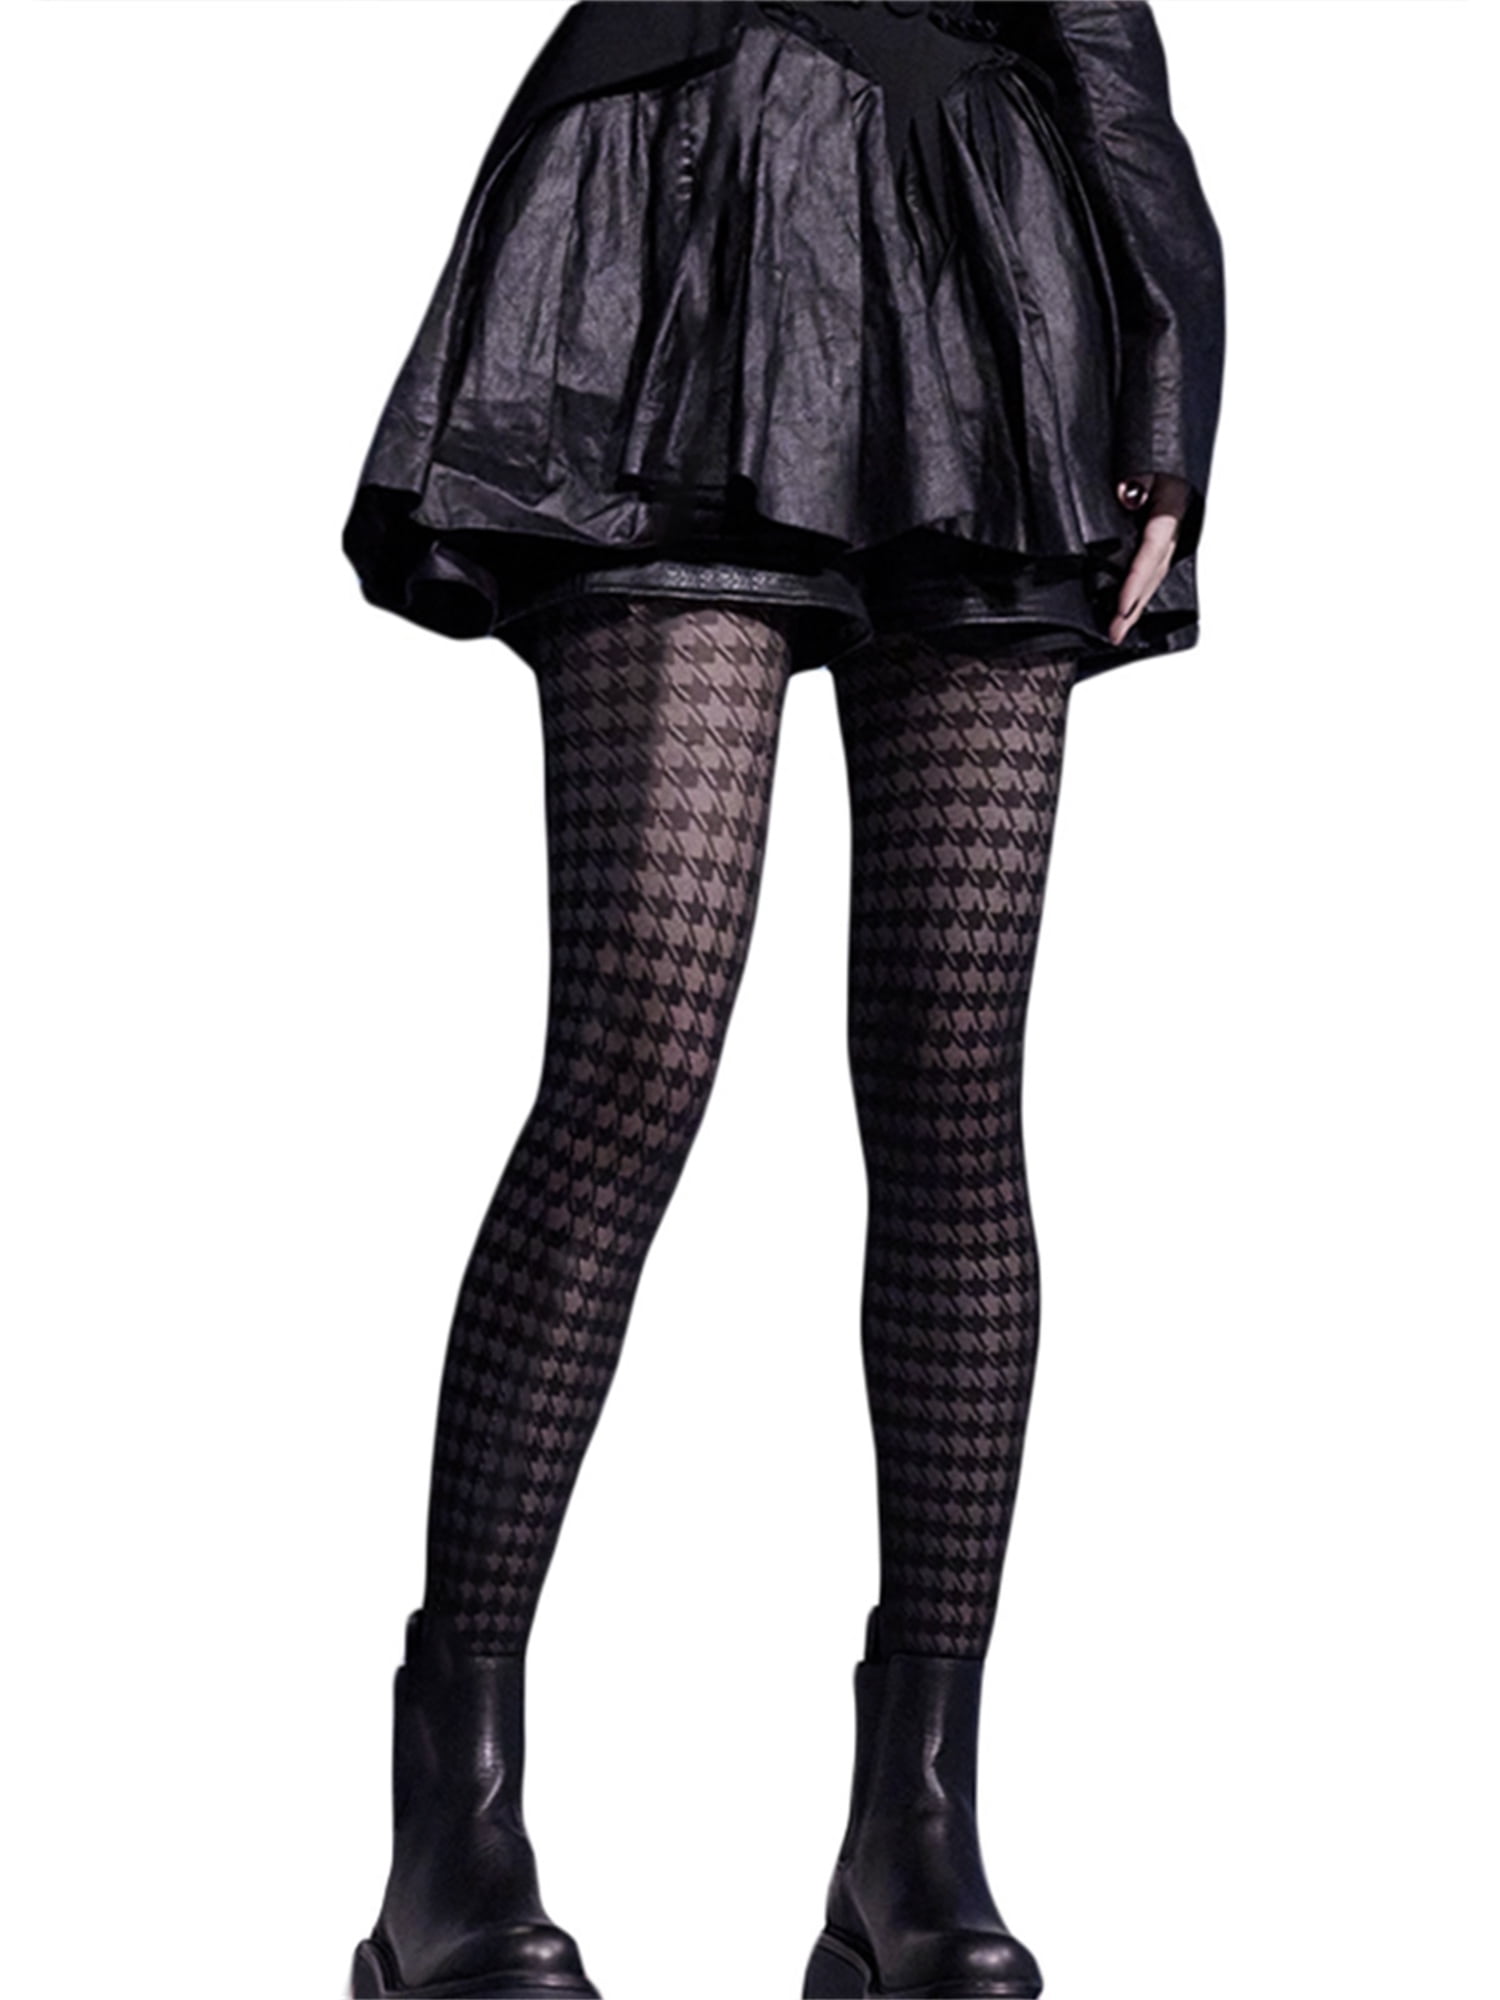 JBEELATE Women Grunge Pattern Fishnets Tights for Sexy Pantyhose Stockings  Gothic Mesh Heart Lace Party Leggings 